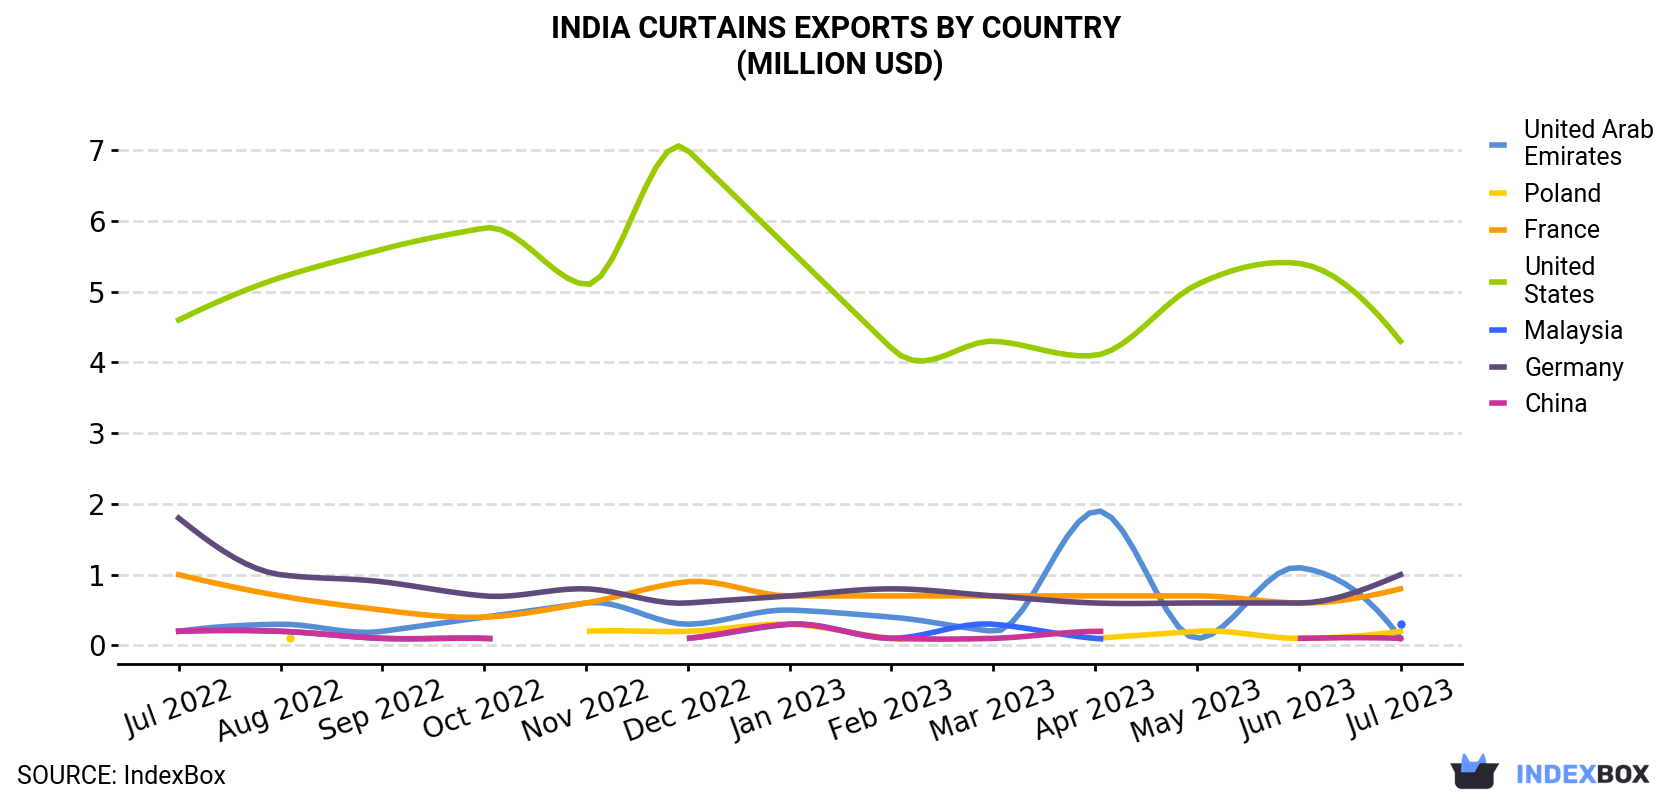 India Curtains Exports By Country (Million USD)